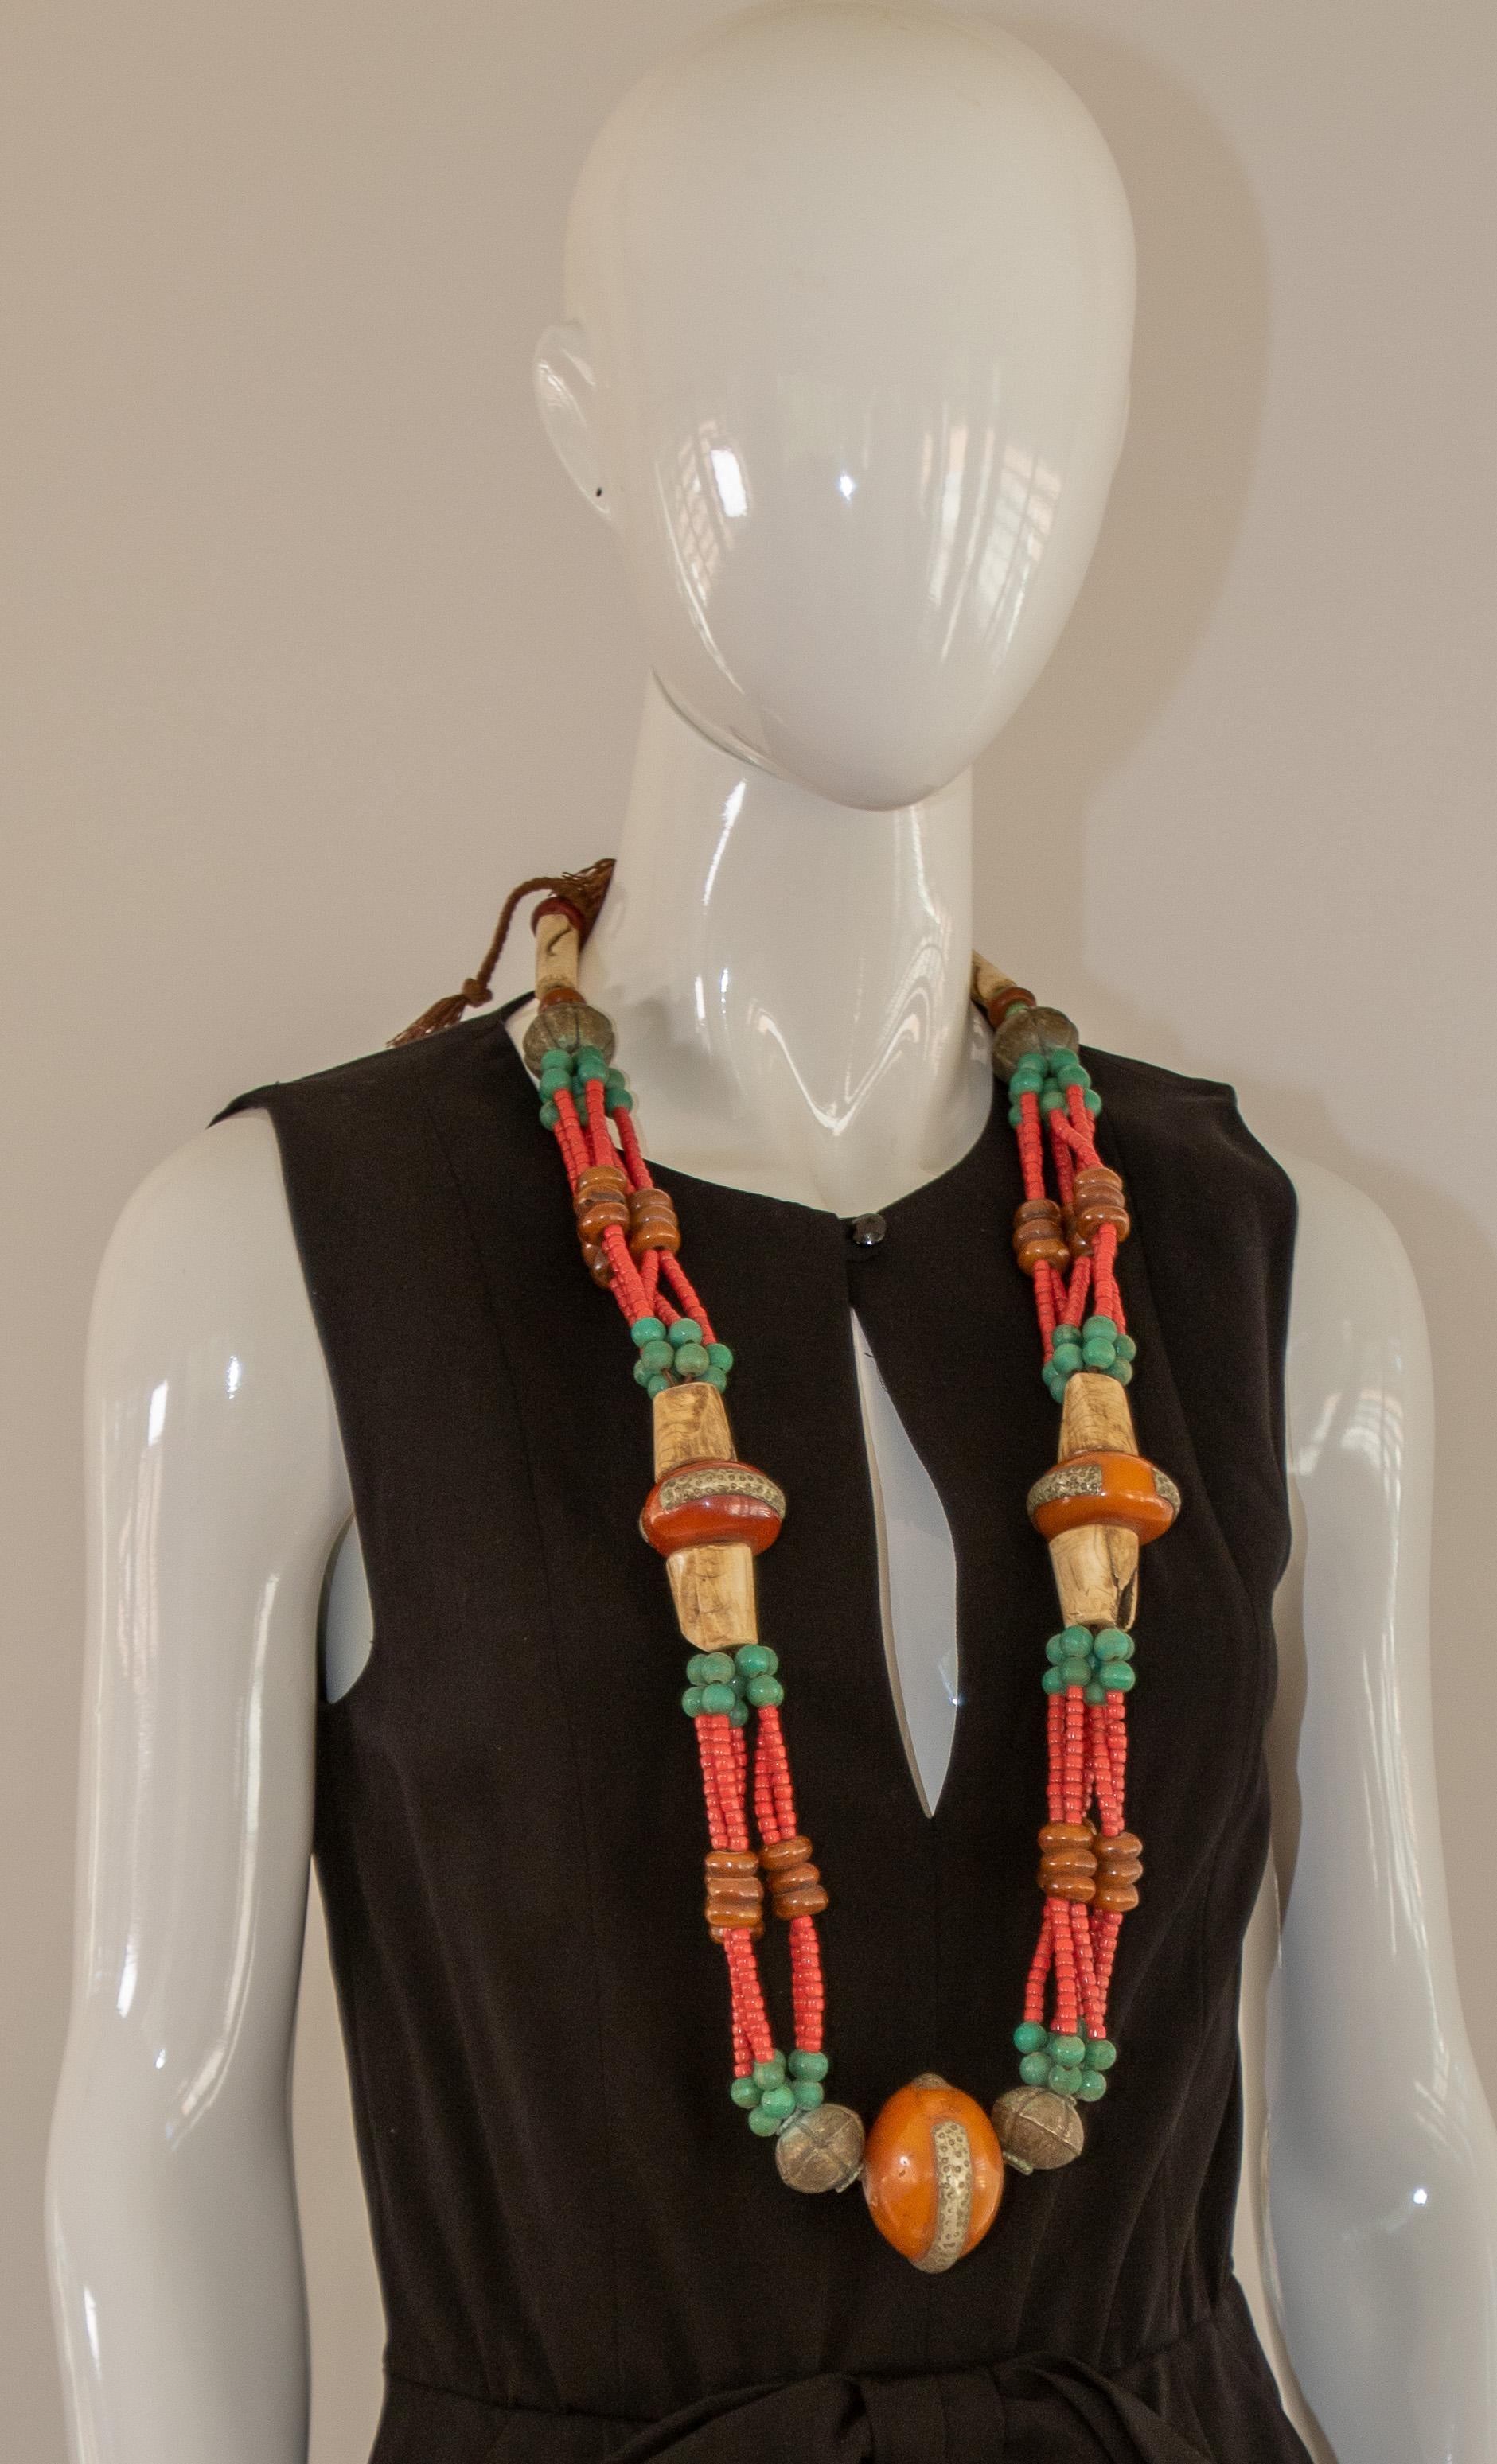 Stunning vintage Moroccan hand crafted, vibrantly colored Berber tribal faux amber resin wedding necklace.  
Striking Amazigh (Berber) wedding necklace comprising faux coral, amazonite, with old animal-horn and faux amber from the Atlas Mountains,